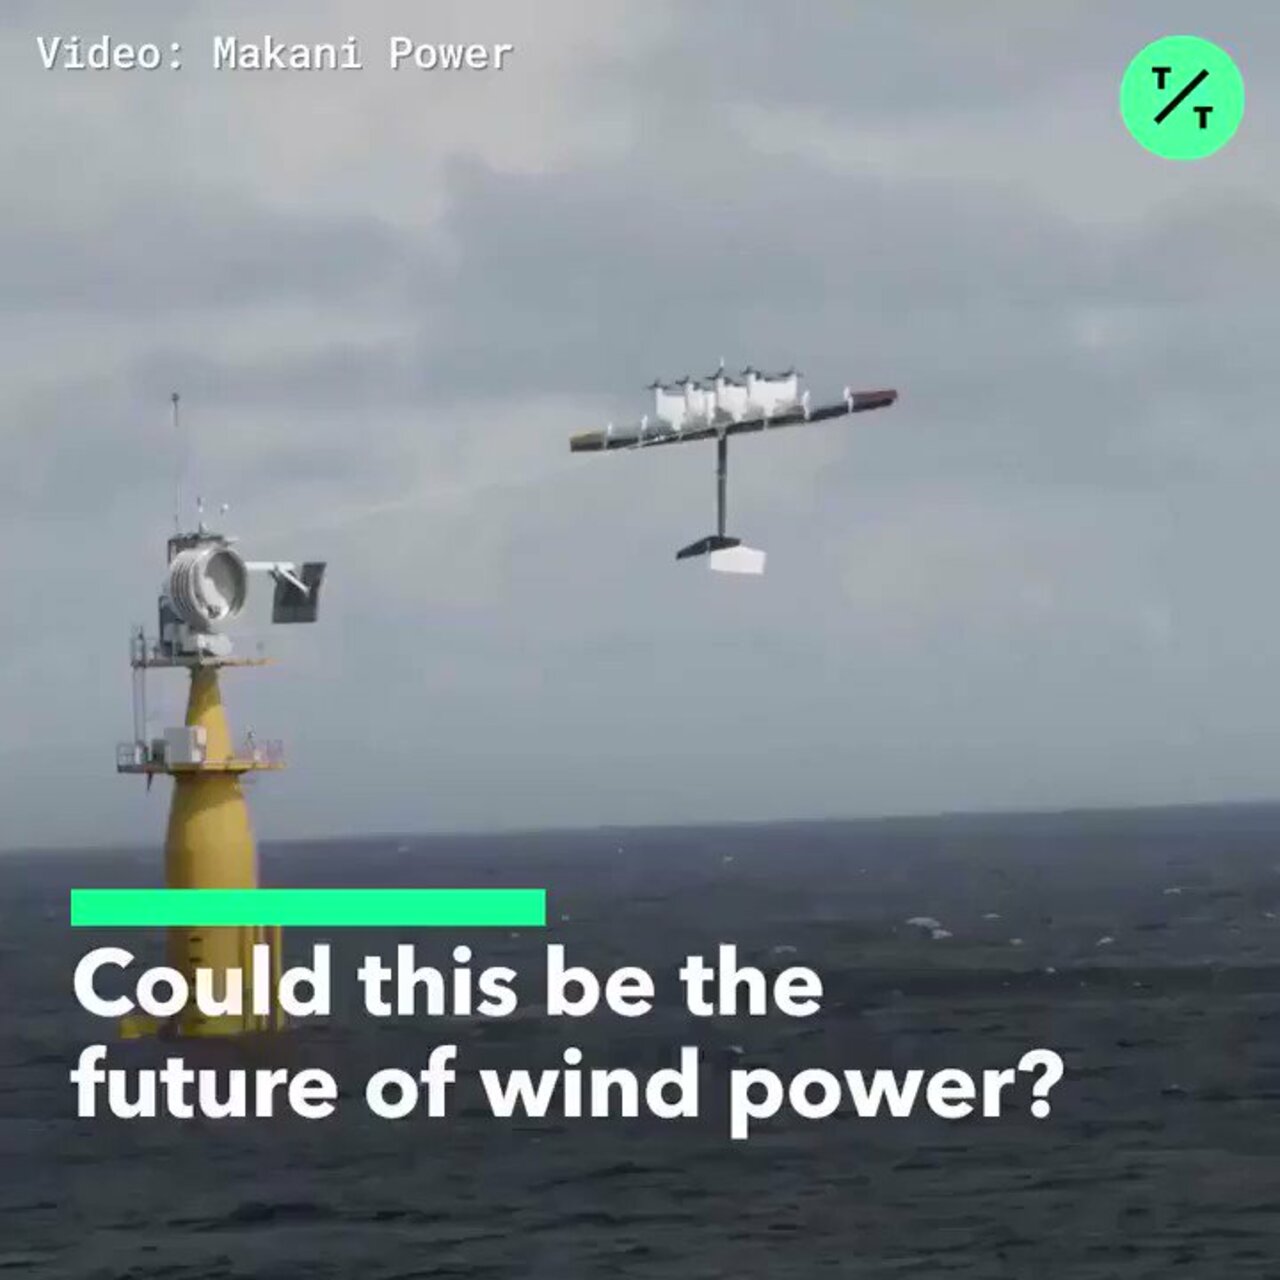 This carbon-fibre kite could be the future of wind power. by @QuickTake #IoT #Innovation cc: @enricomolinari @scobleizer https://t.co/IMqA8tHide